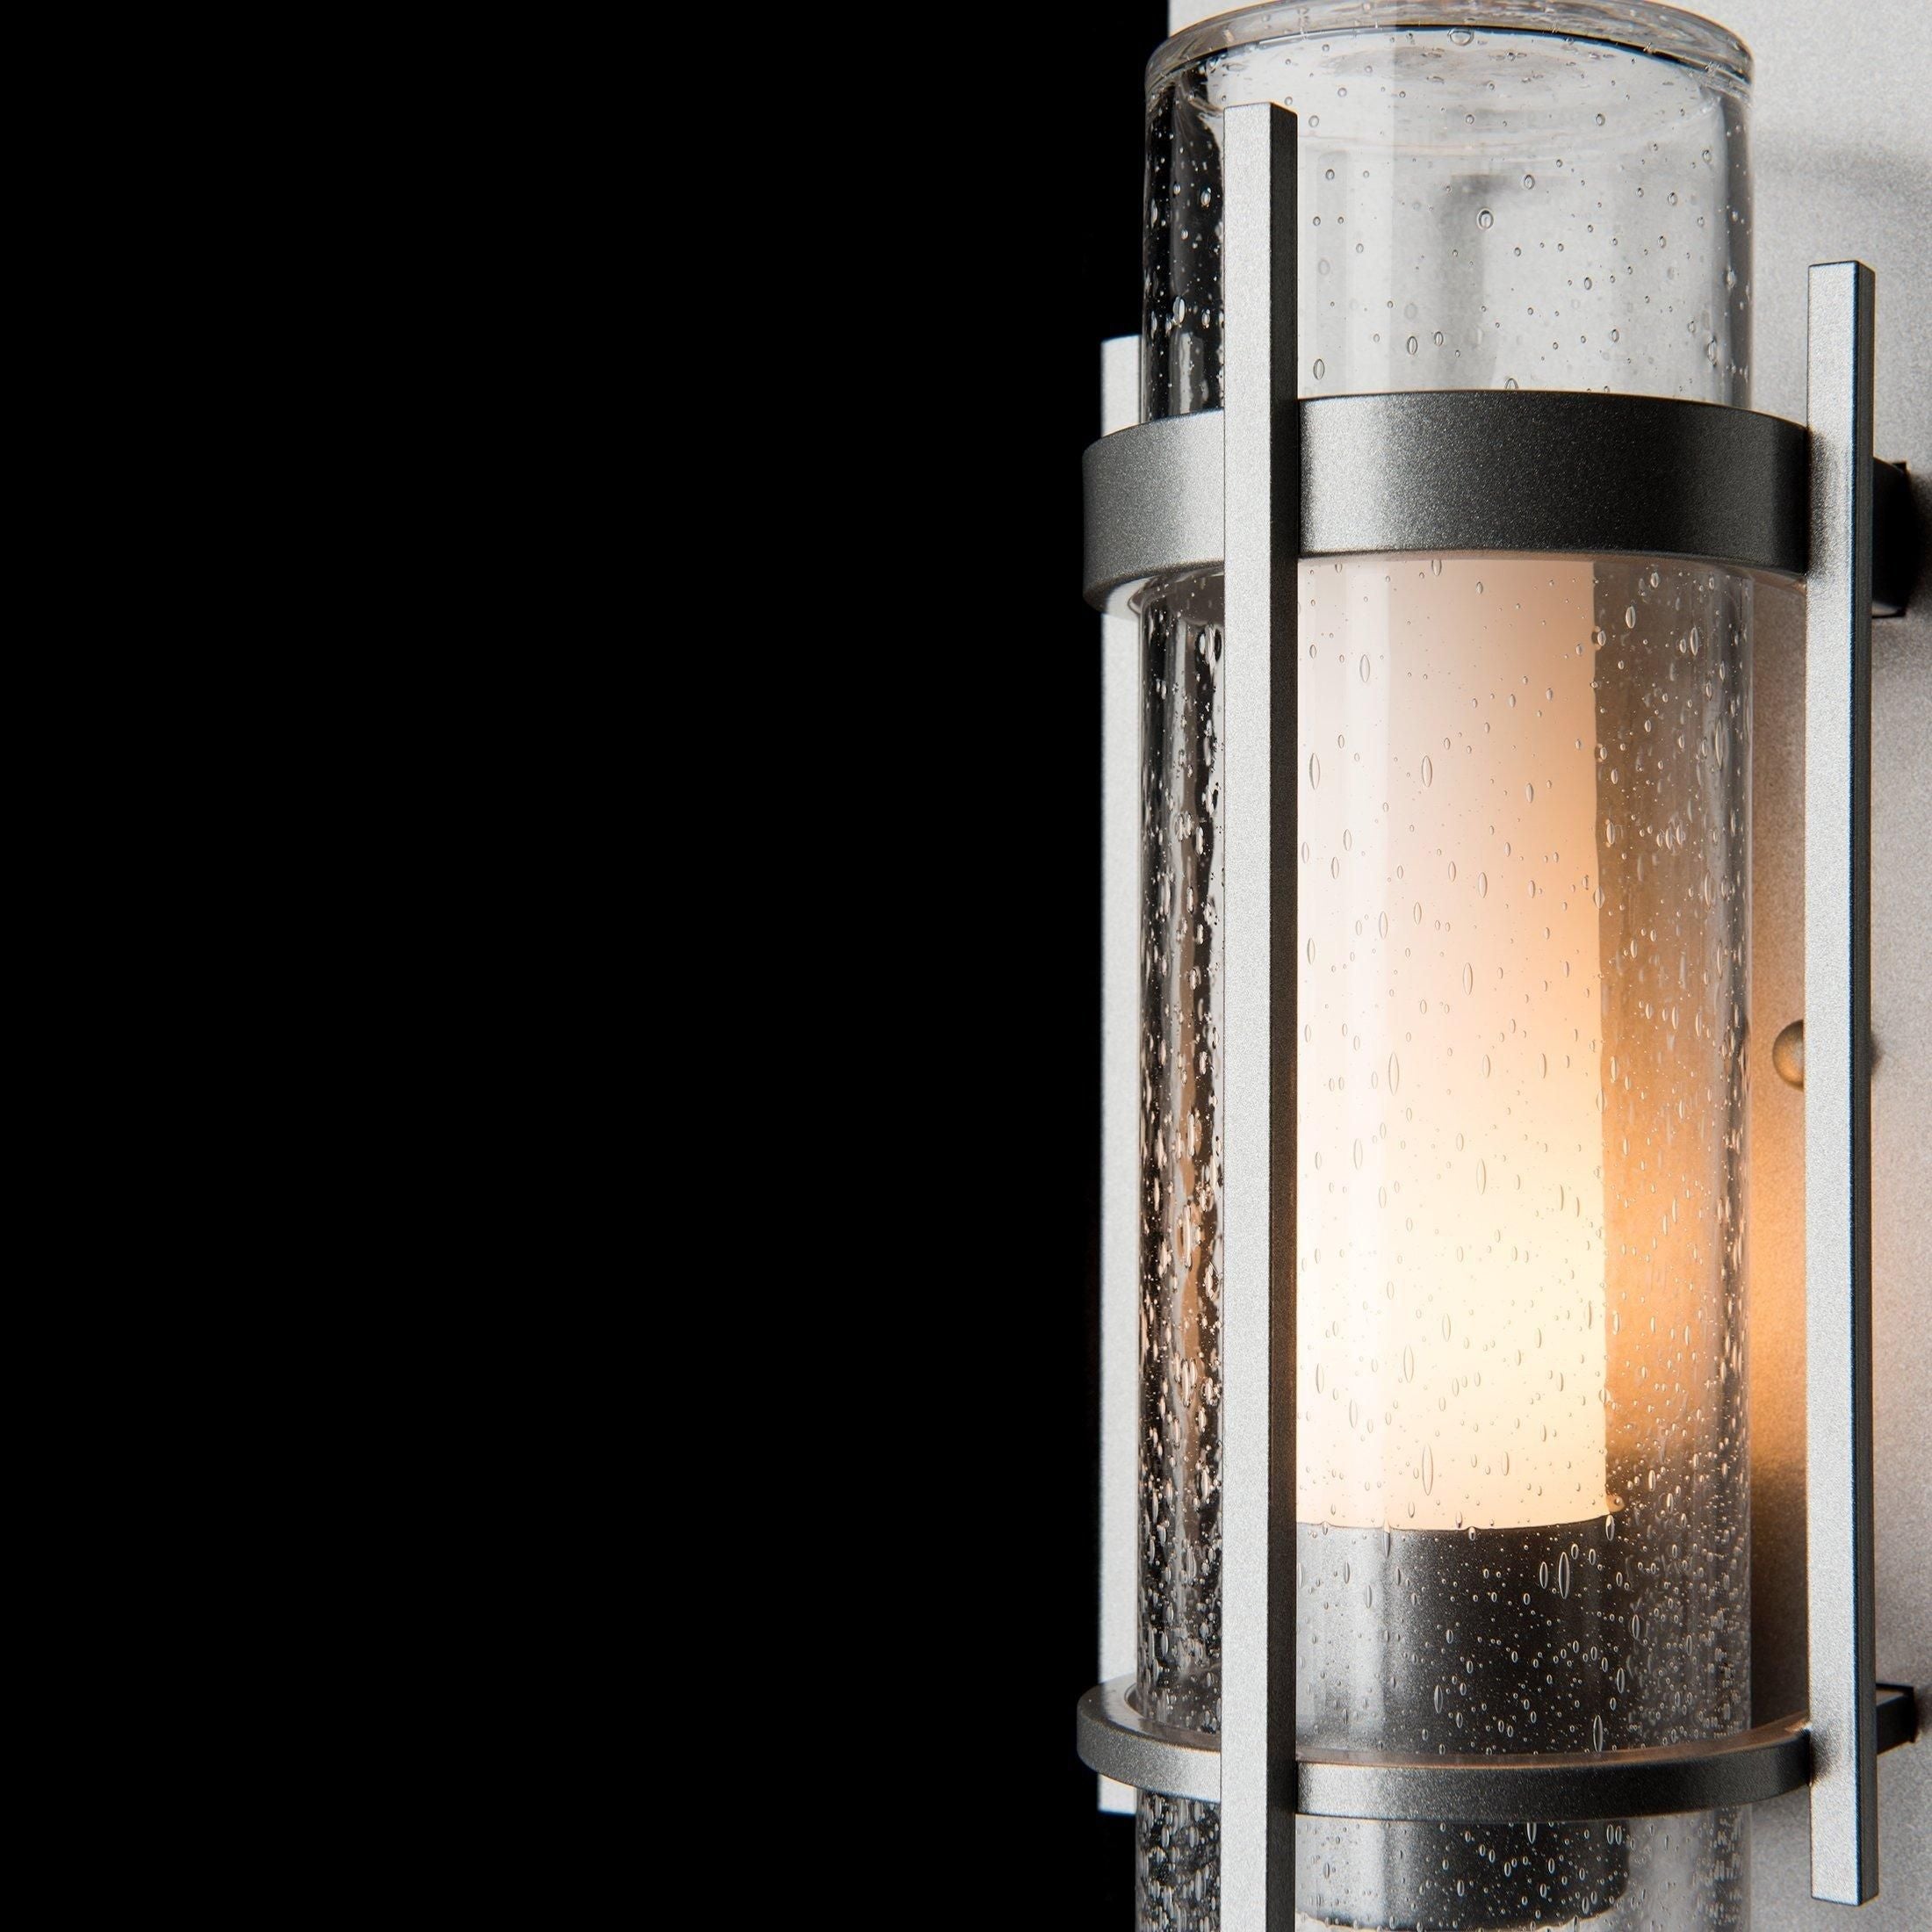 Hubbardton Forge - Banded Sconce - Lights Canada